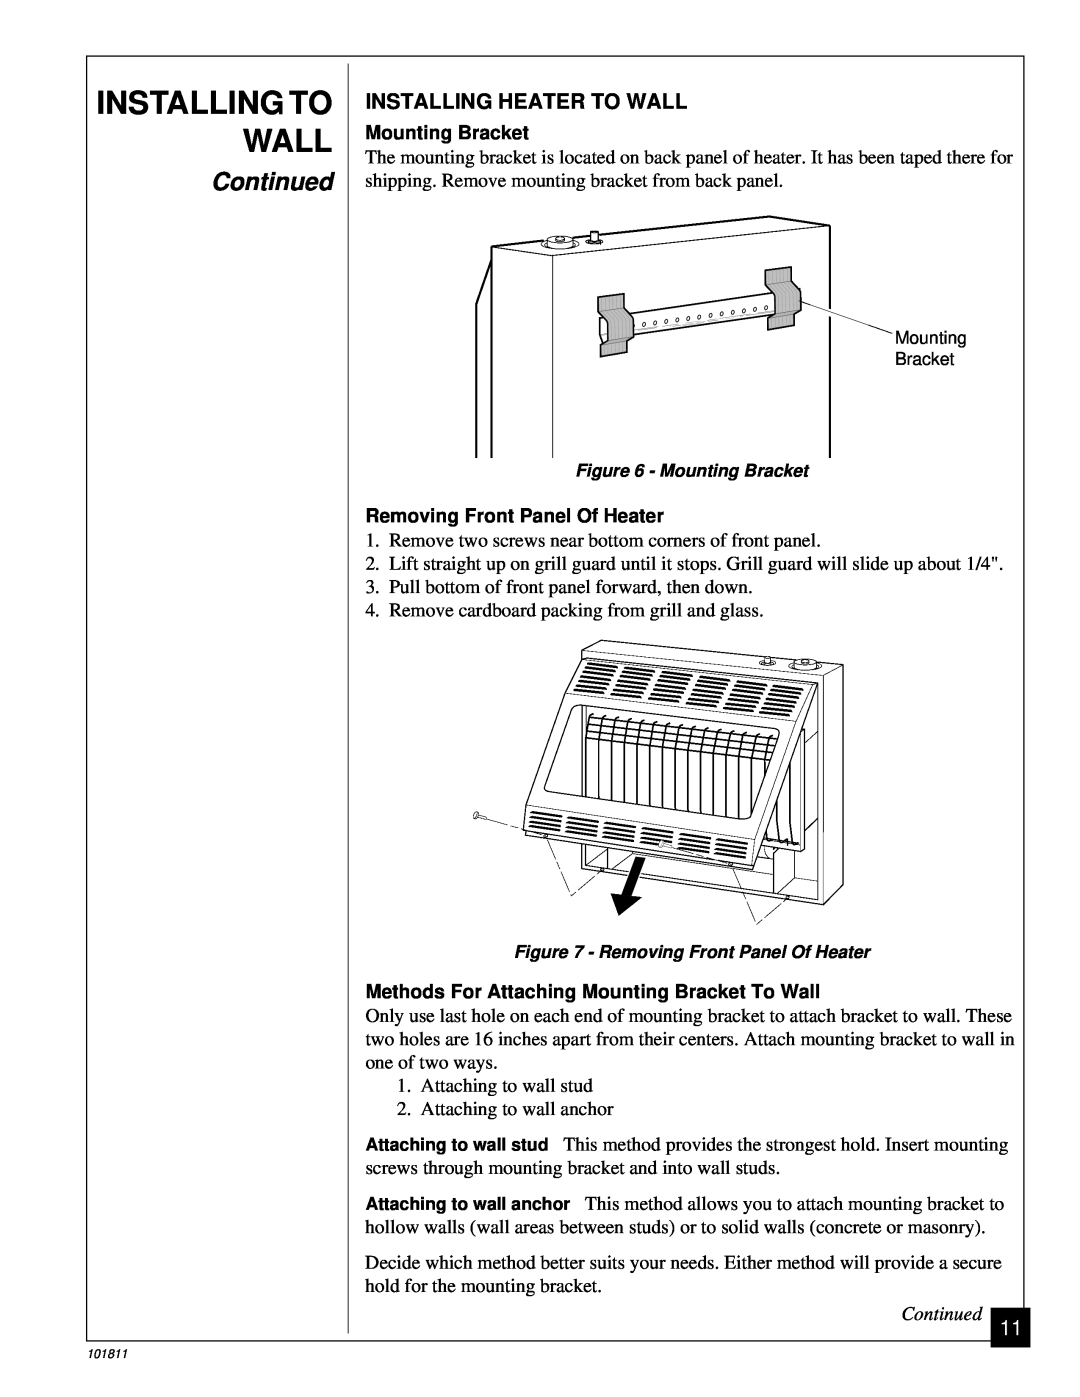 Desa 101811-01C.pdf installation manual Installing To Wall, Continued, Installing Heater To Wall, Mounting Bracket 